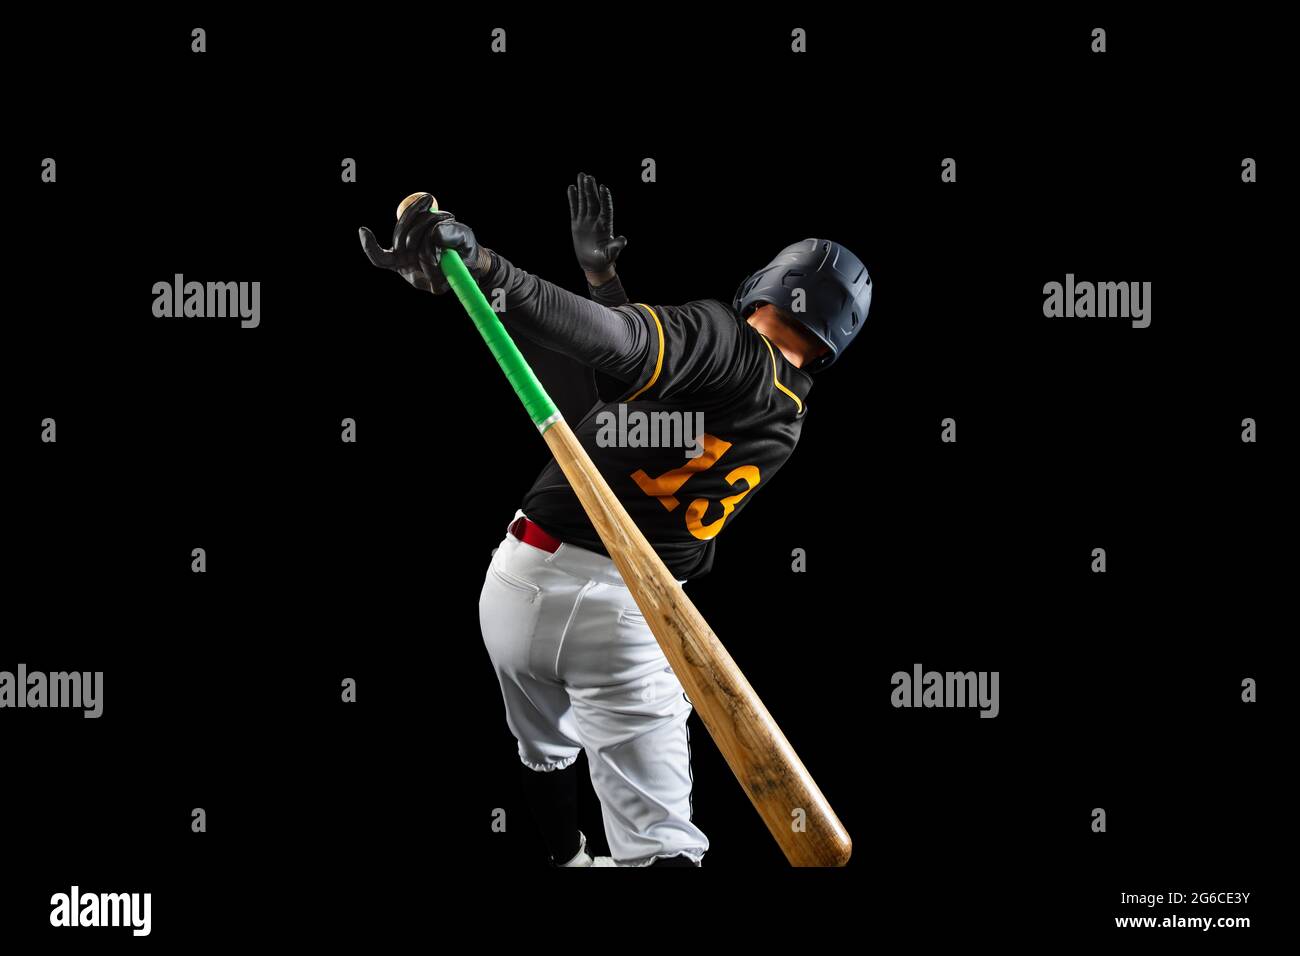 Professional baseball player, pitcher in sports uniform and equipment playing baseball isolated on black studio background in neon light. Rear view Stock Photo